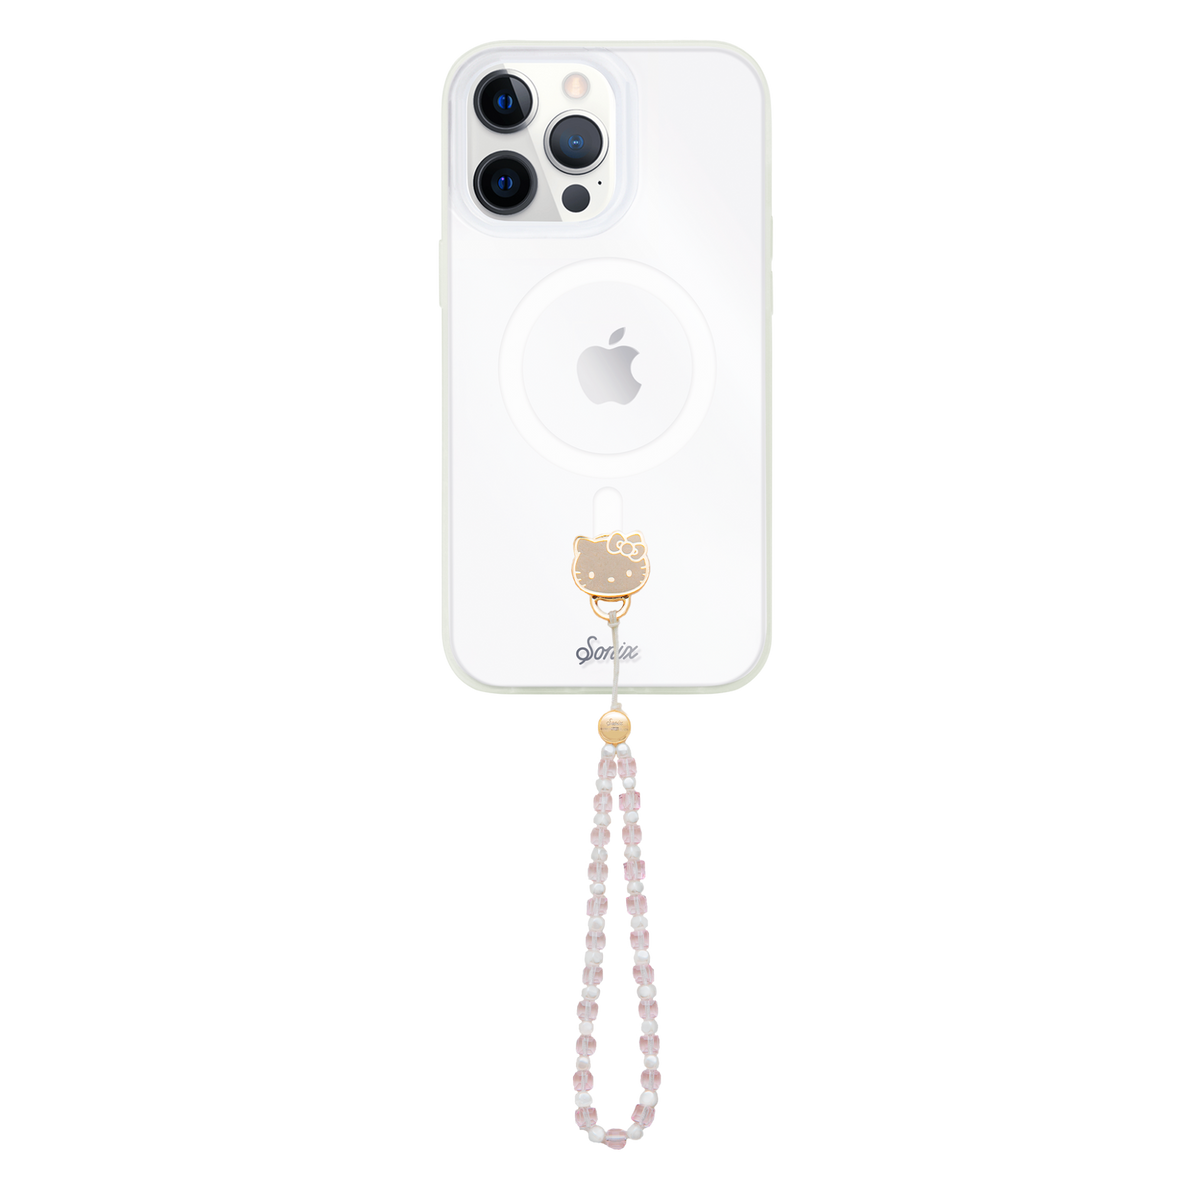 LOUIS VUITTON LV HELLO KITTY PATTERN iPhone 12 Case Cover